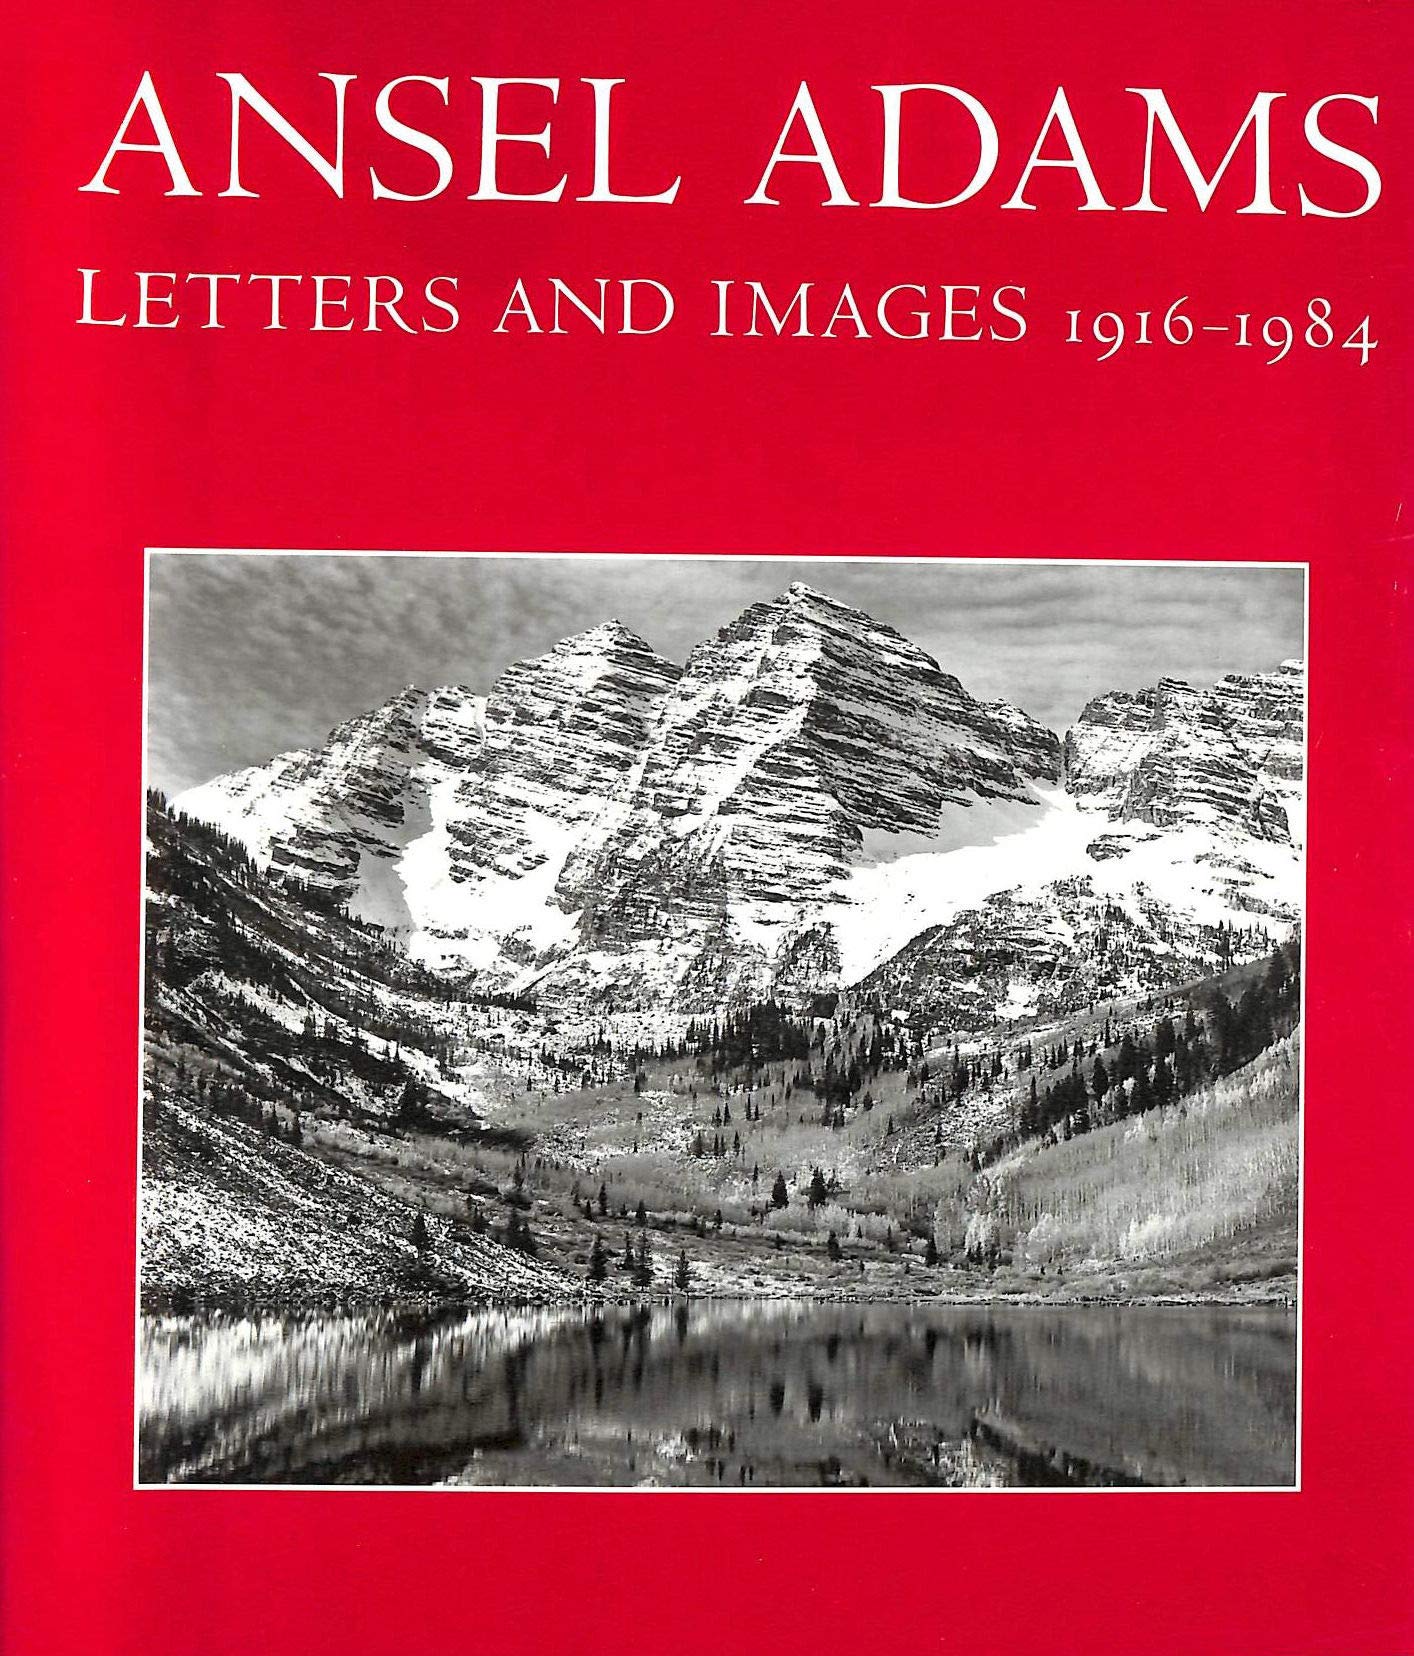 Ansel Adams: Letters and Images 1916-1984 (Revised)